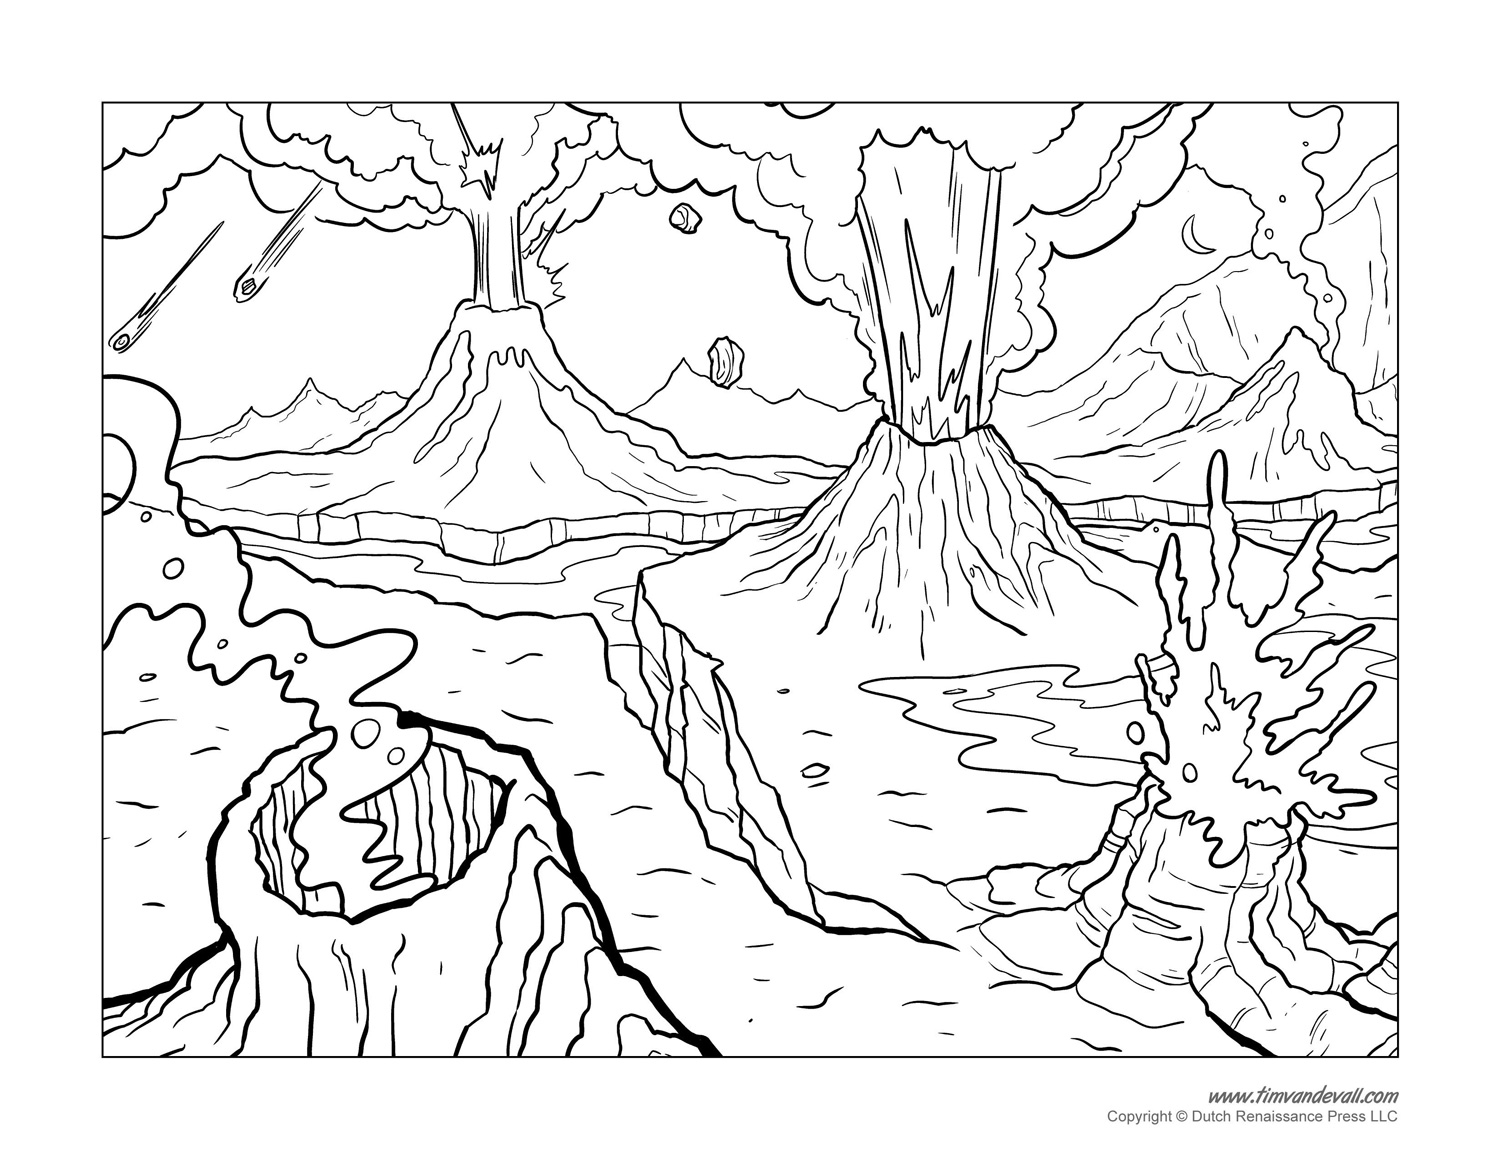 volcano-coloring-pages